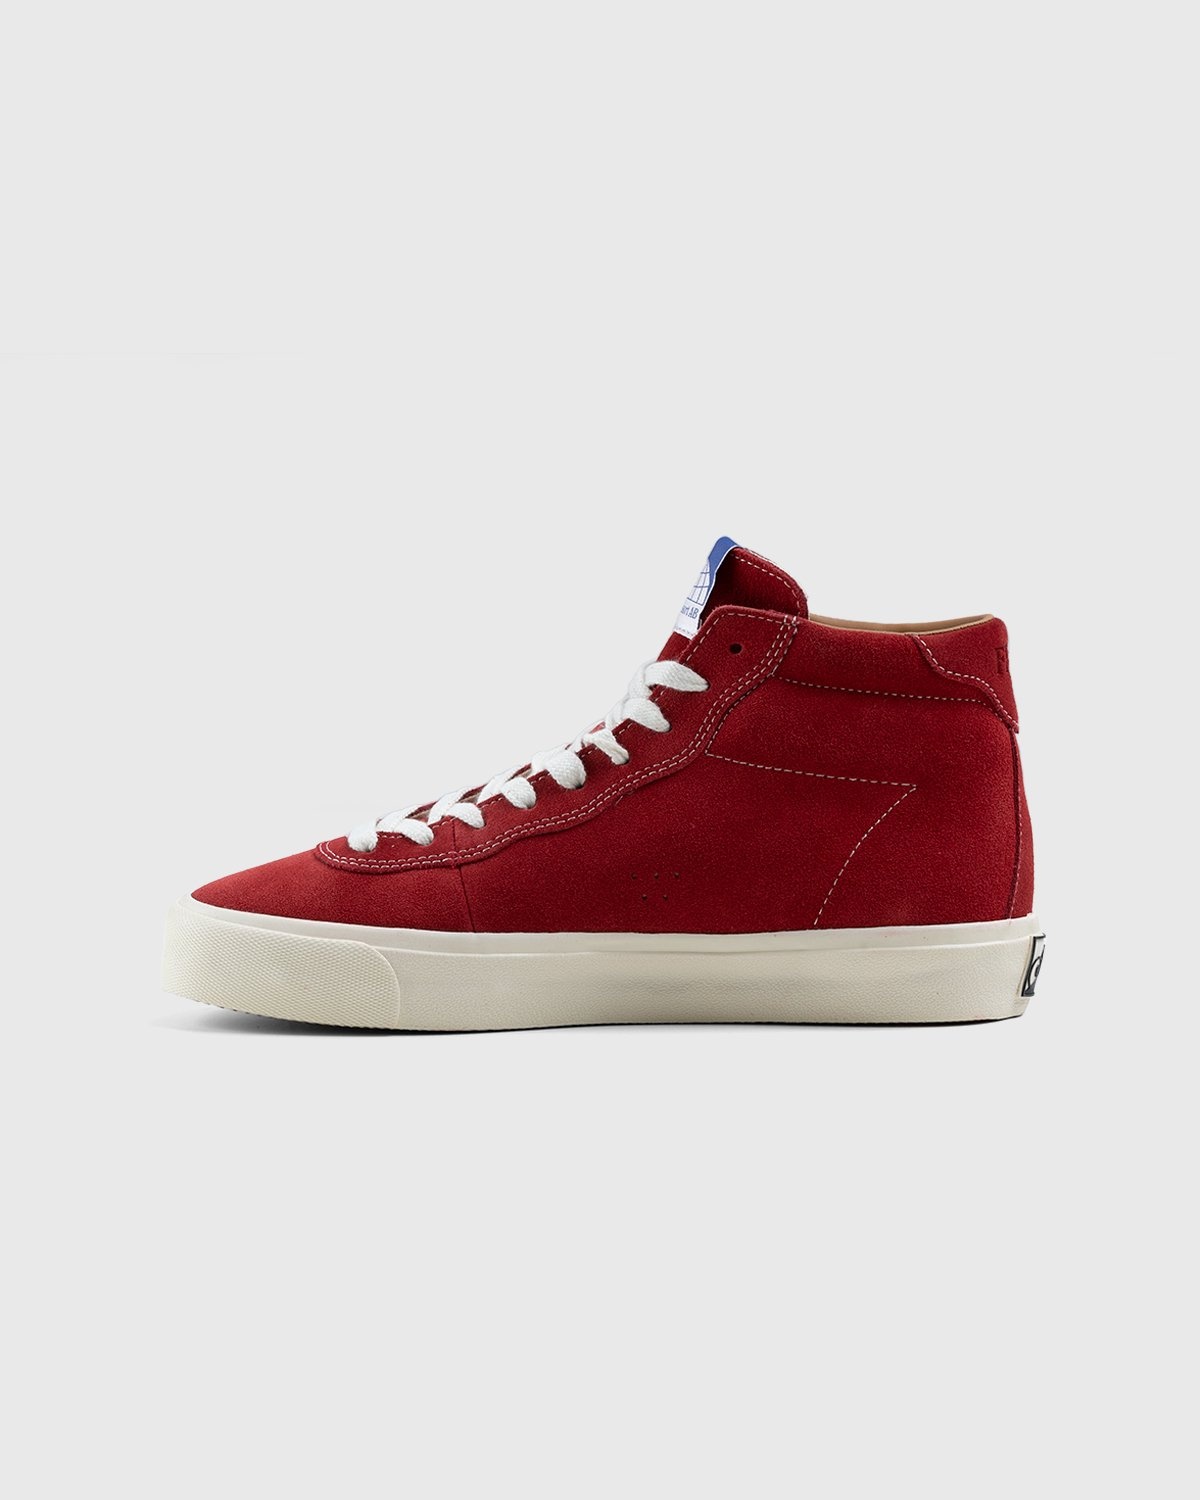 Last Resort AB – VM001 Hi Suede Old Red/White - High Top Sneakers - Red - Image 2